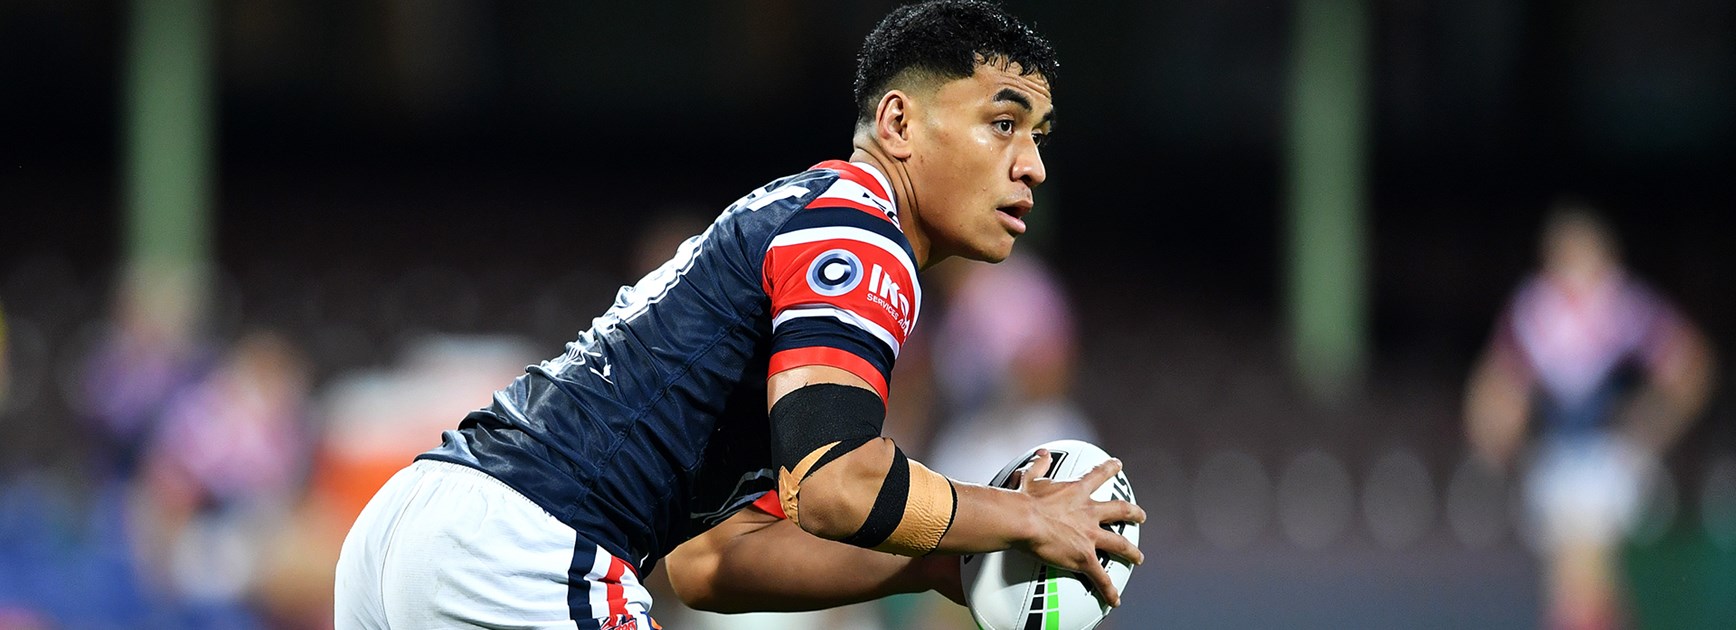 Roosters release Christian Tuipulotu